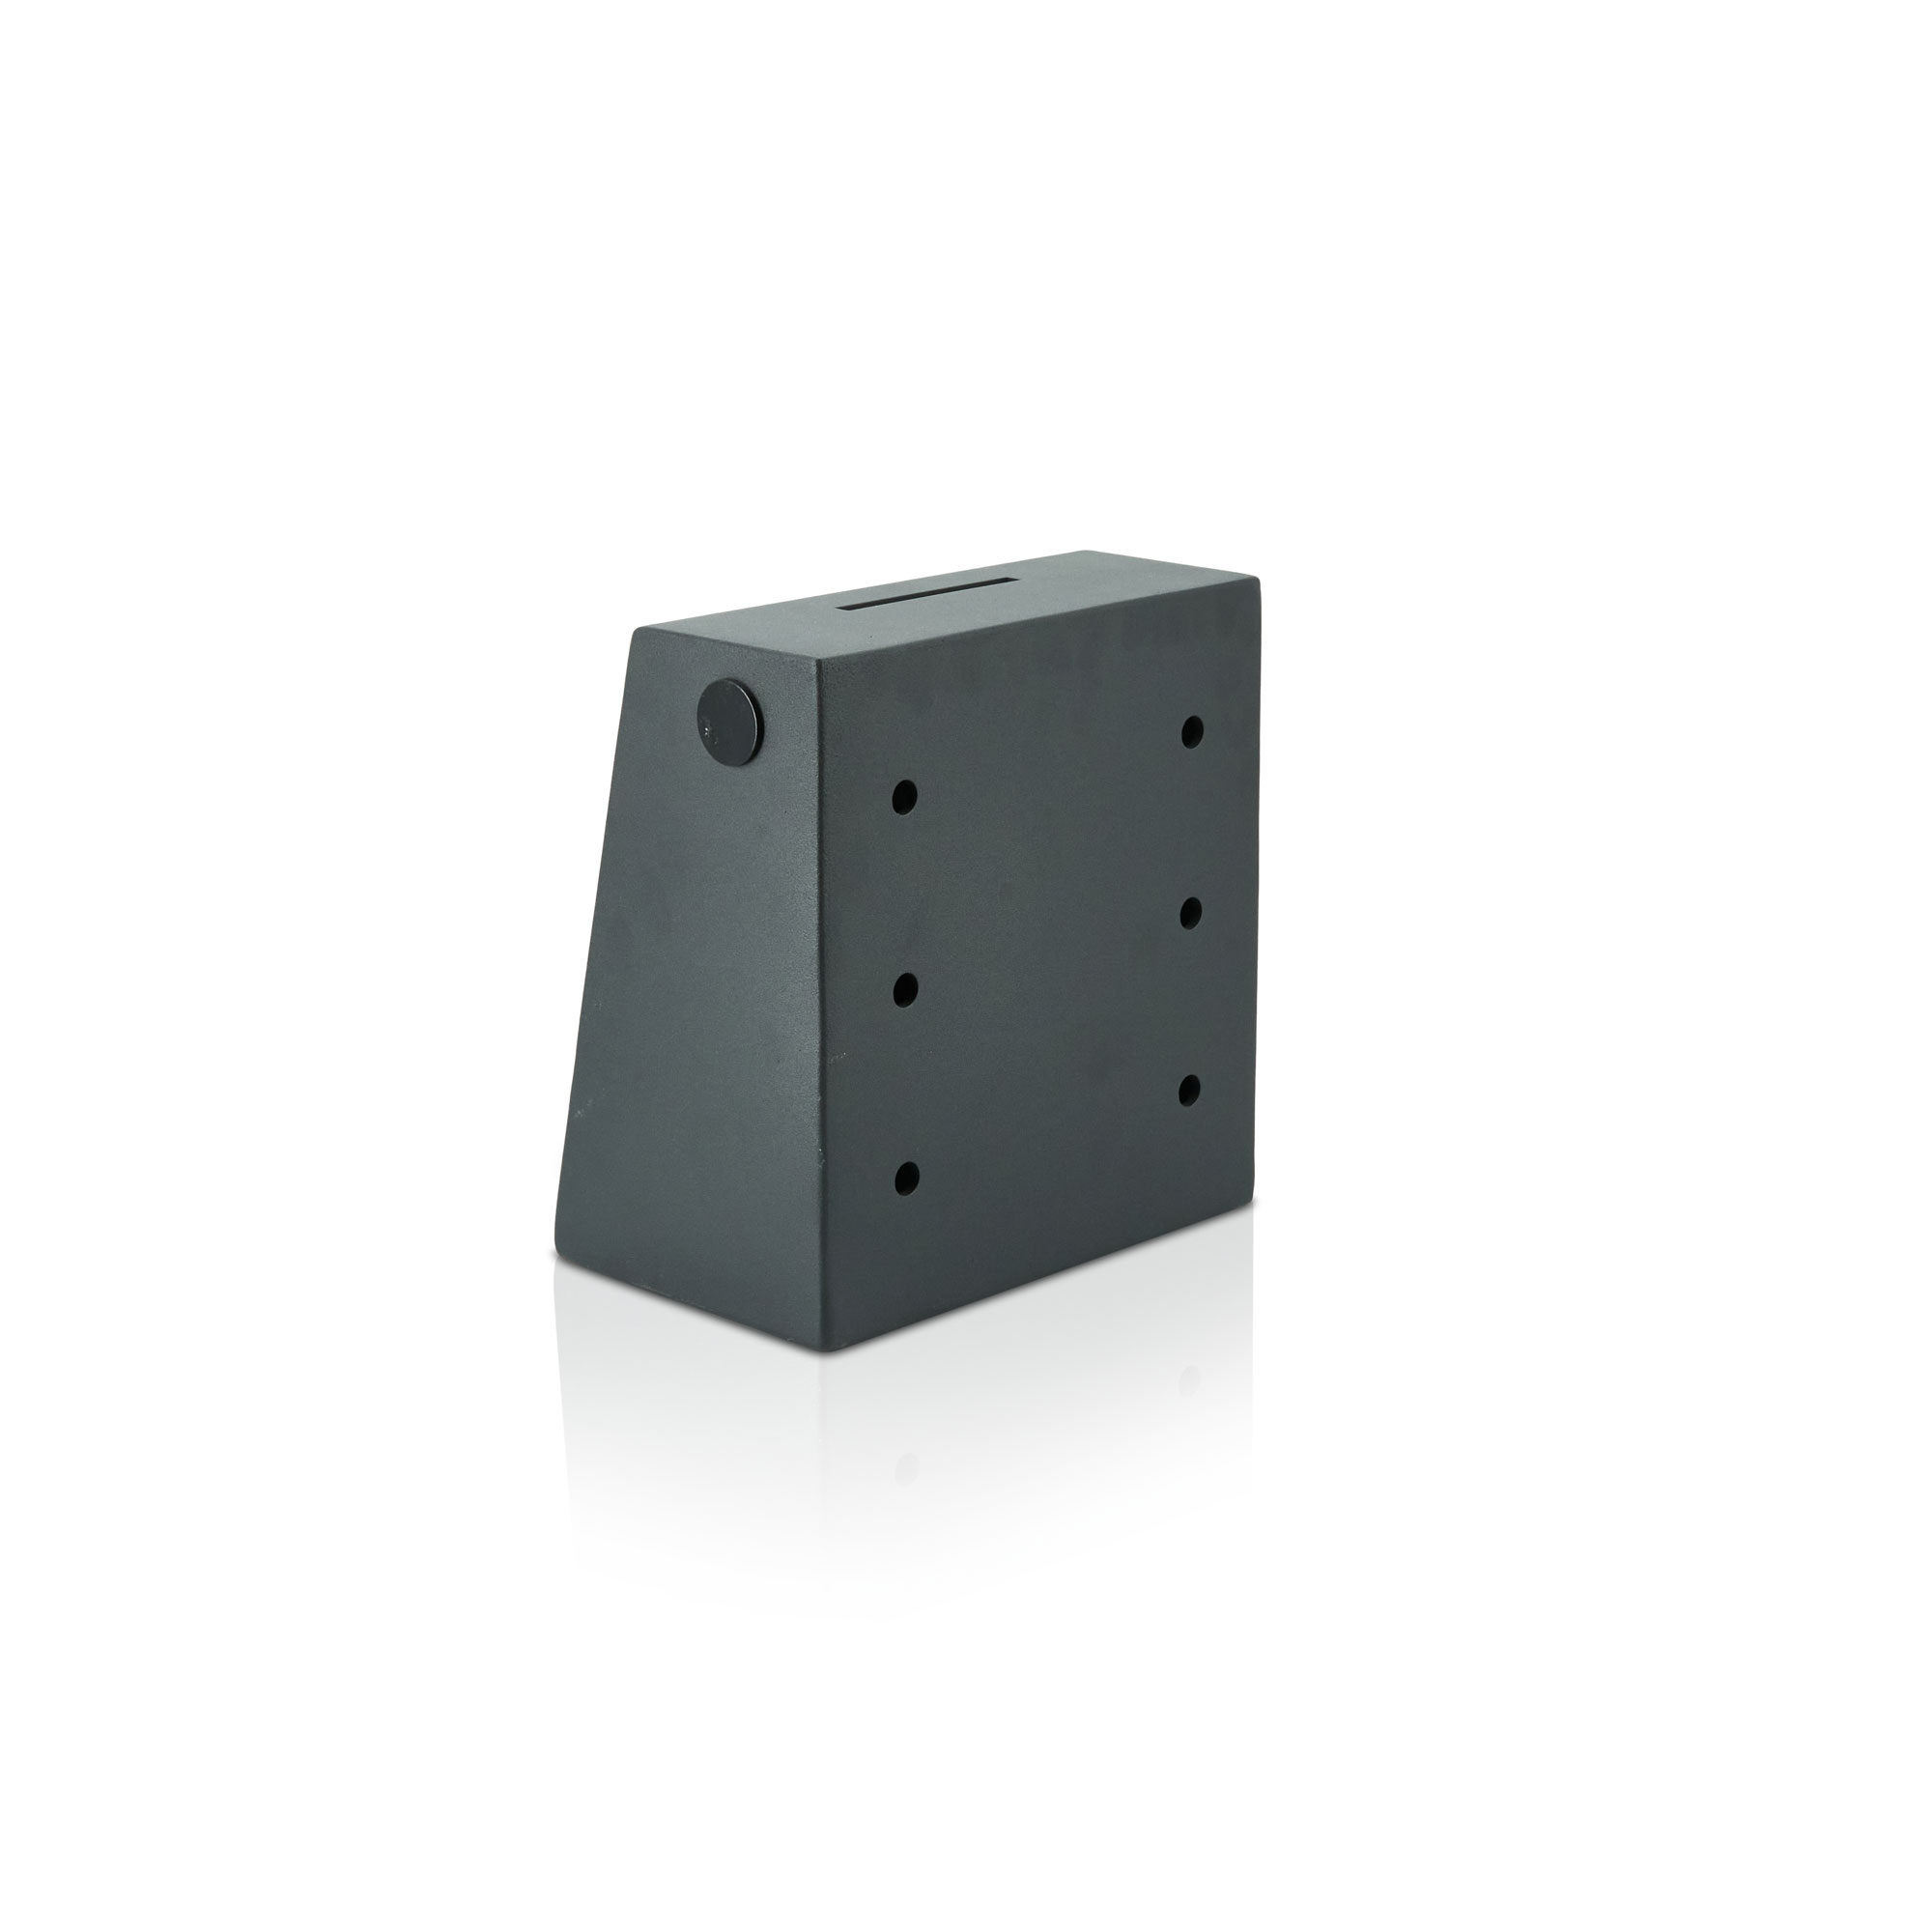 Heavy-duty offering box | reinforced construction | 10 attachment points | Enhanced retrieval security